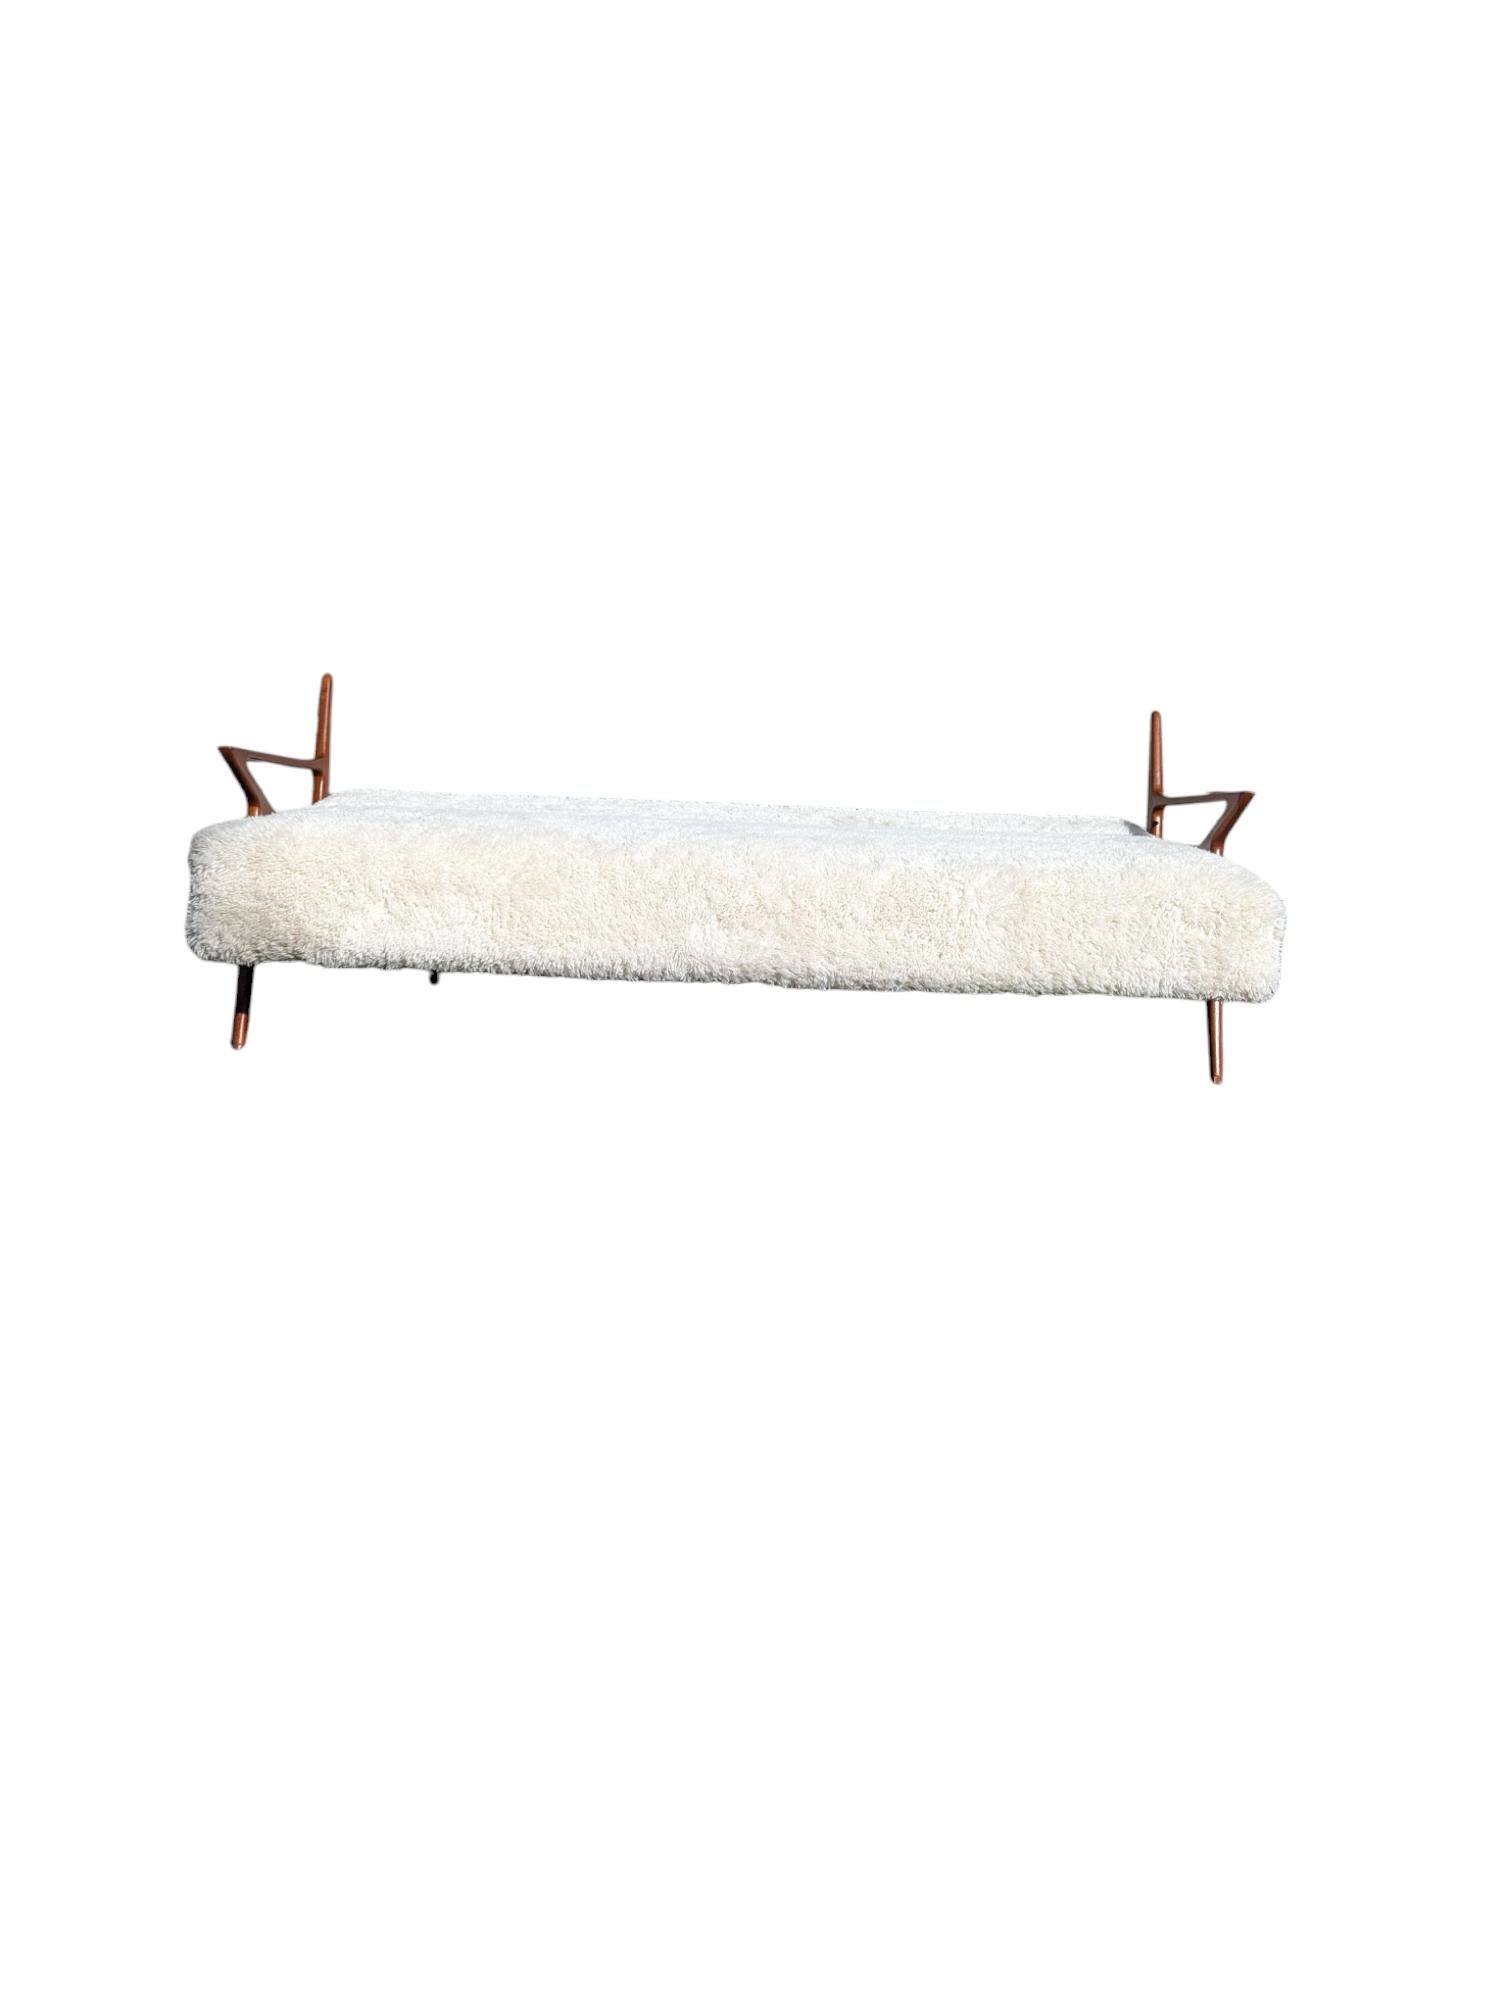 Original Poul Jensen for Selig 'Z-Sofa' daybed In Good Condition For Sale In PORT MELBOURNE, AU